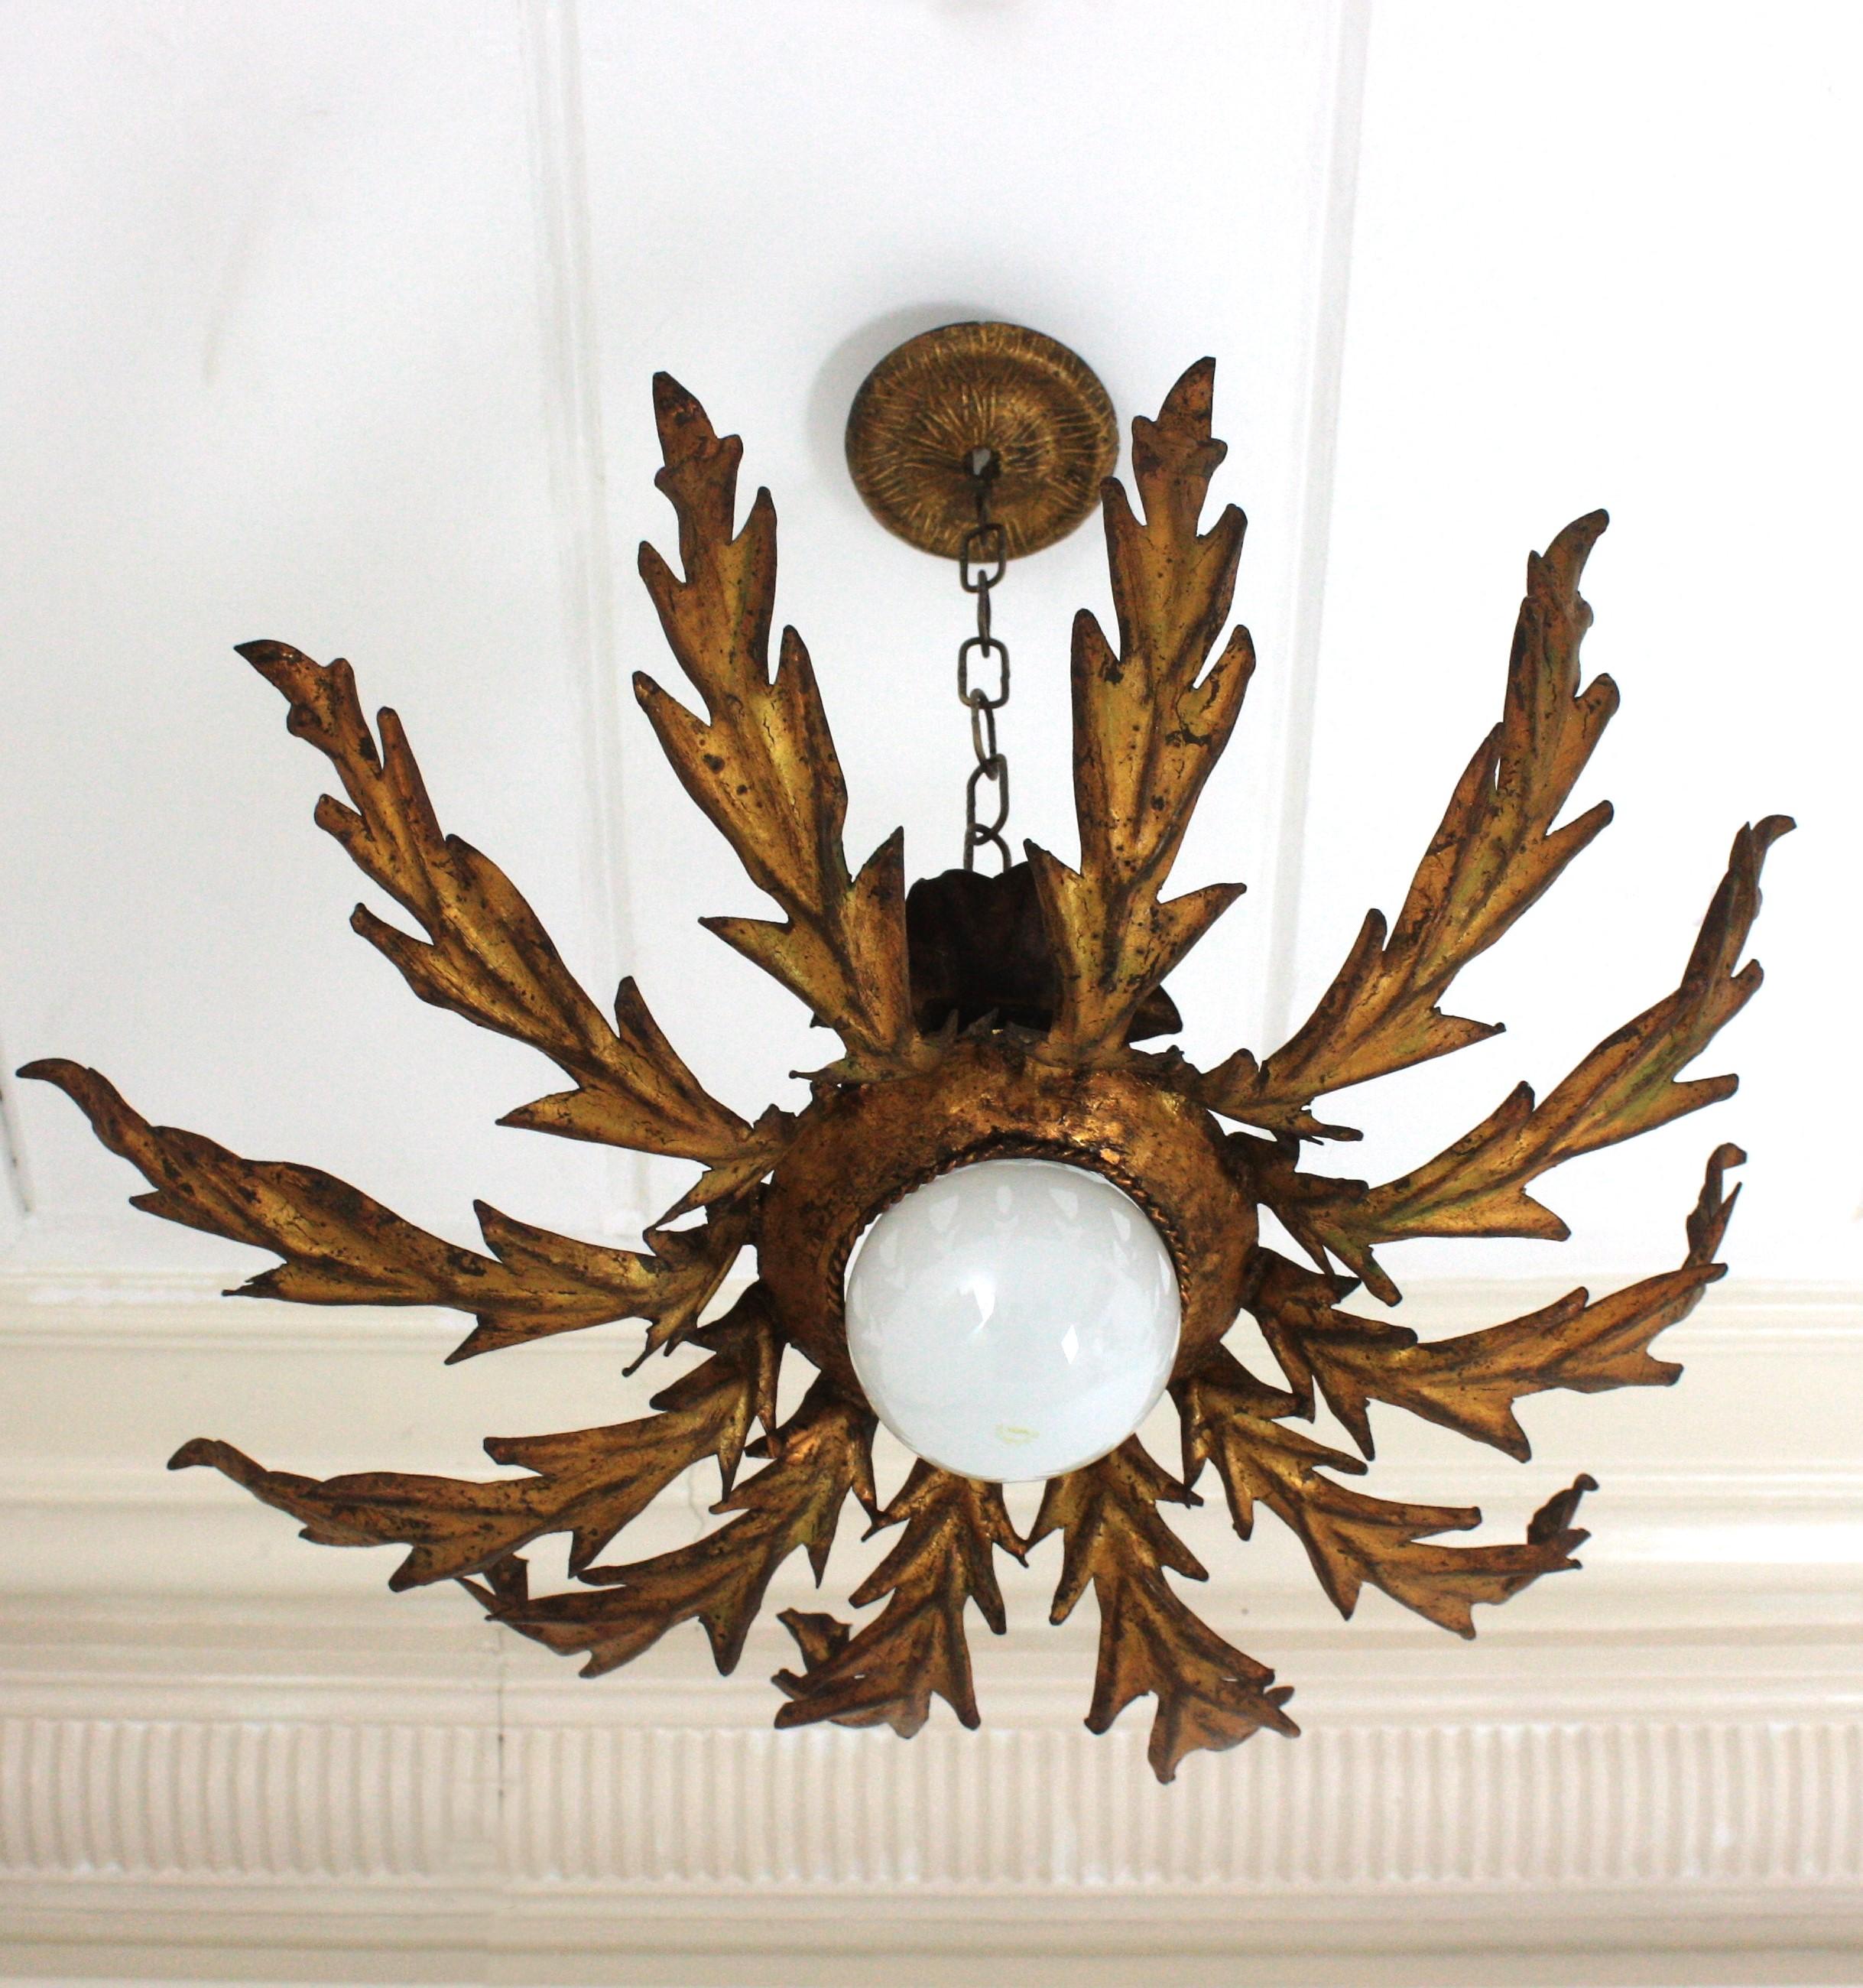 French Sunburst Leafed Ceiling Light Fixture in Gilt Iron, 1940s For Sale 11